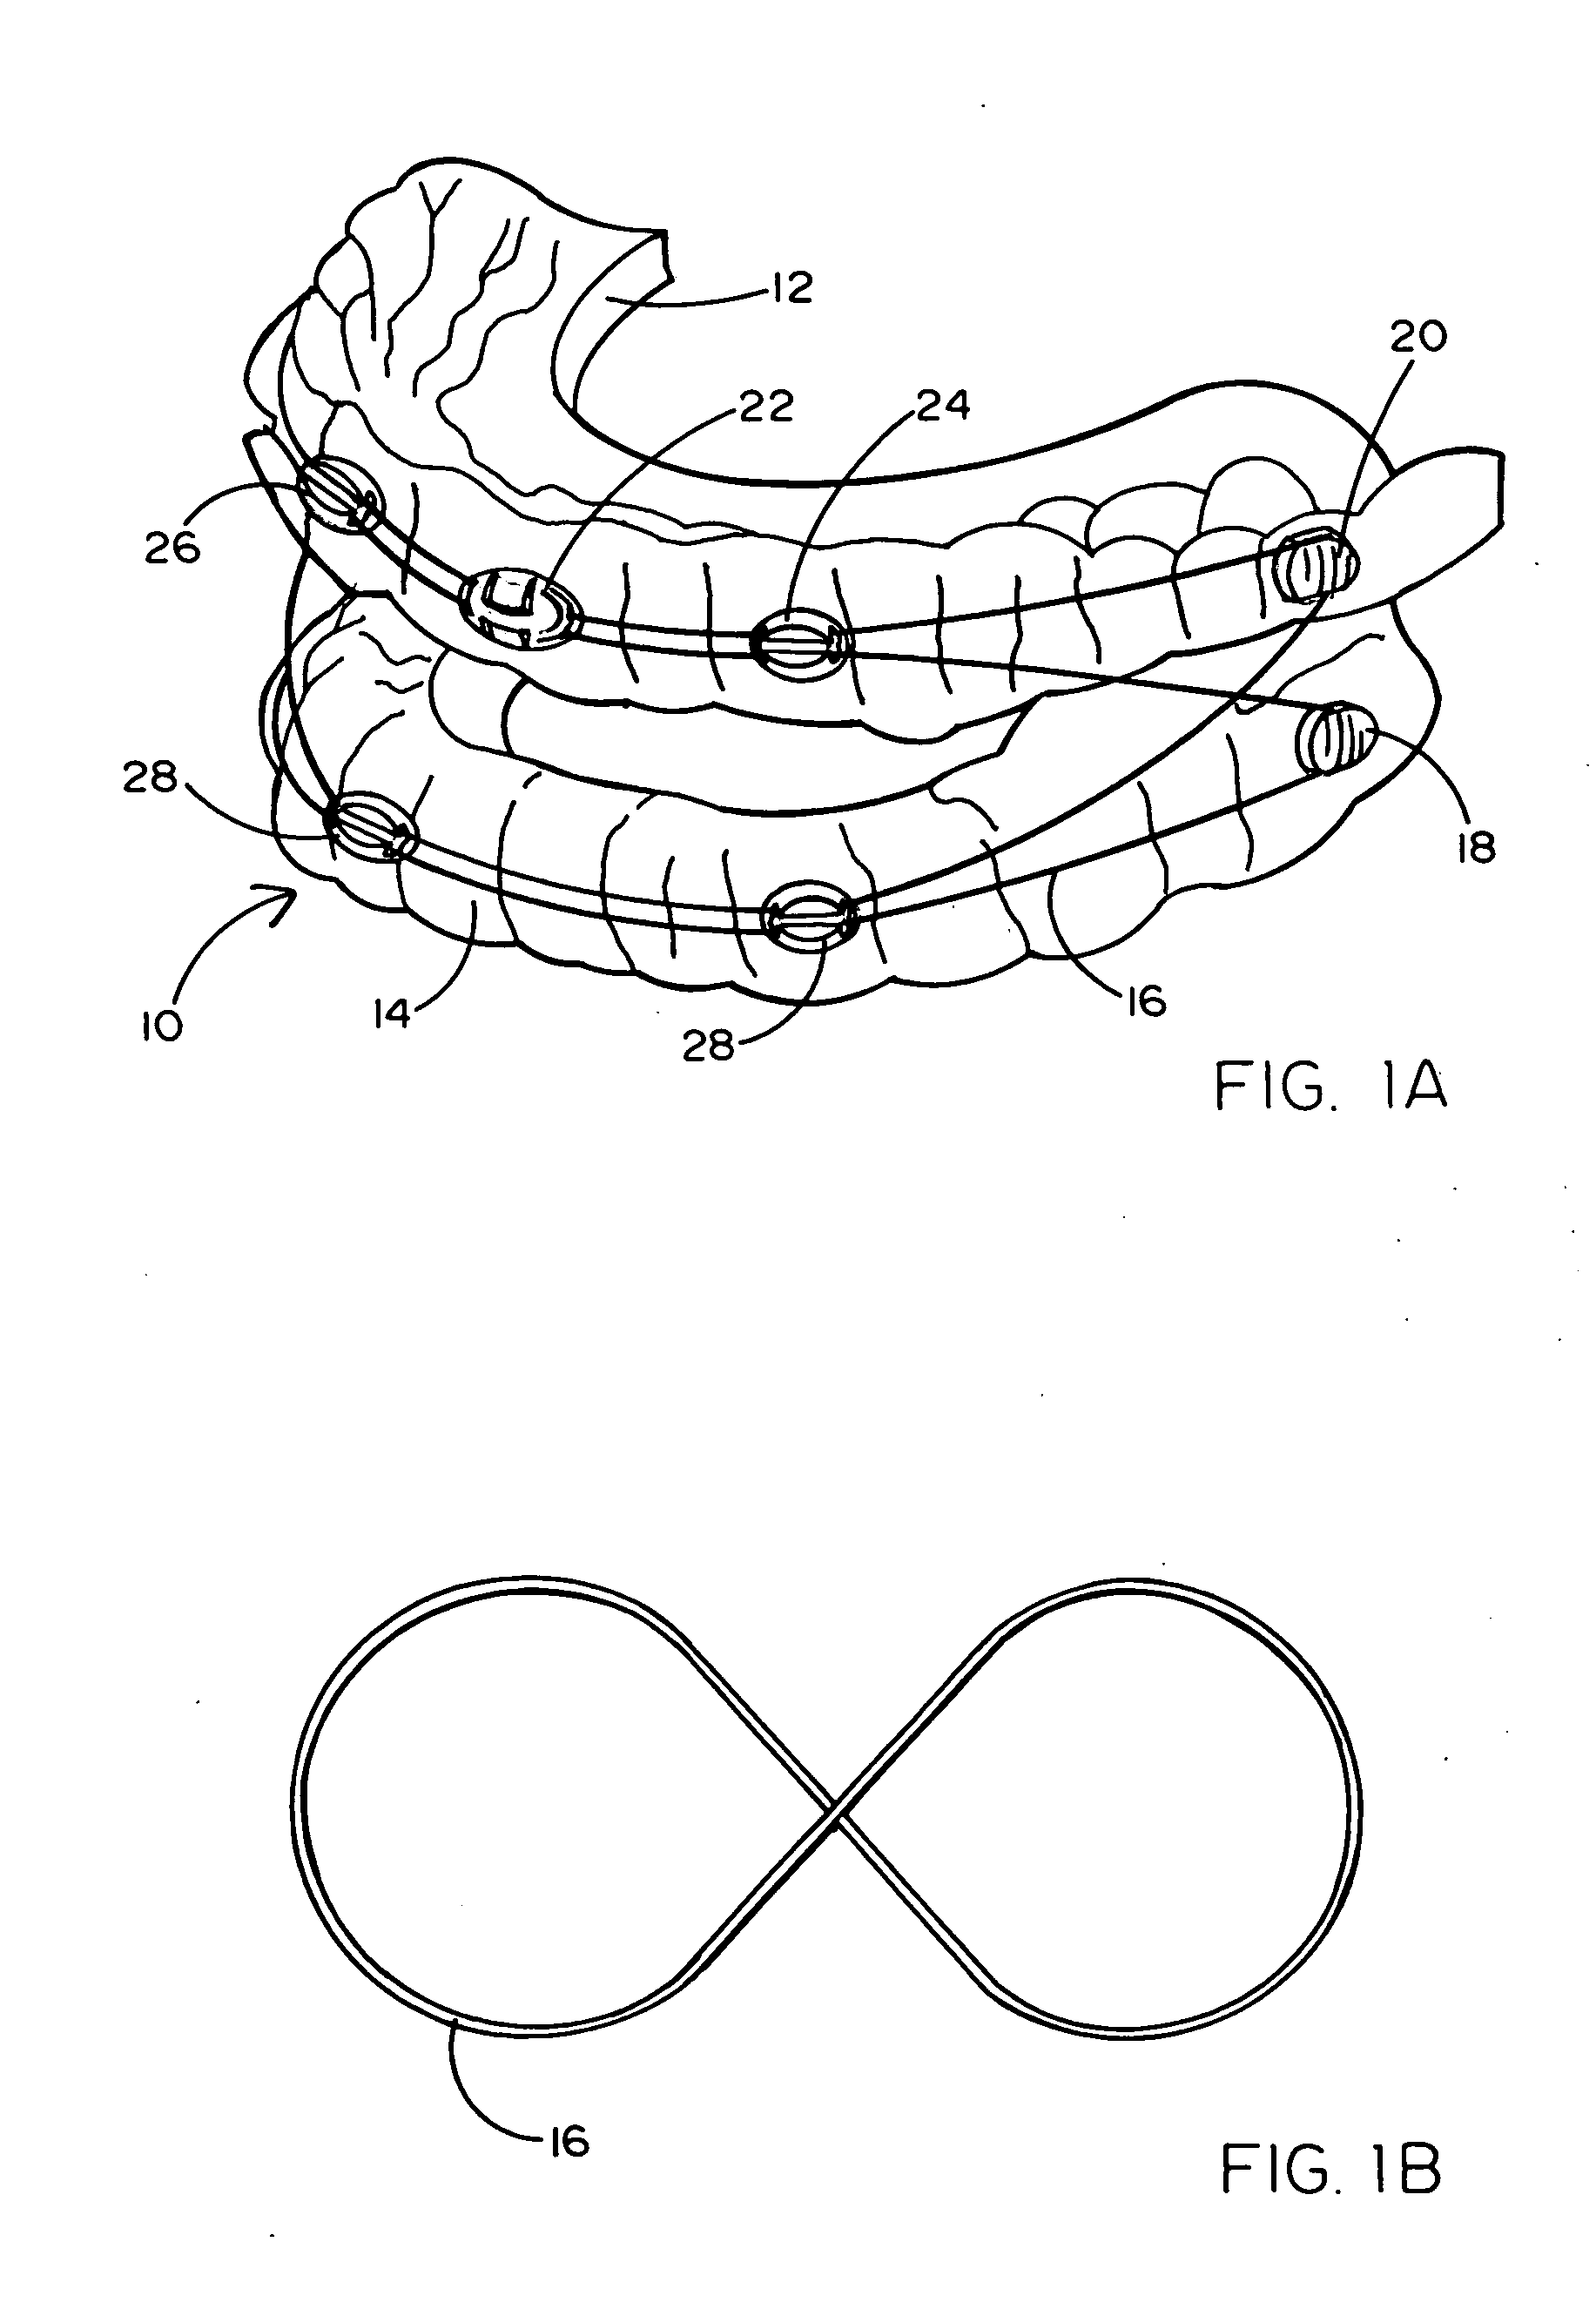 Adjustable oral appliance for treatment of snoring and sleep apnea